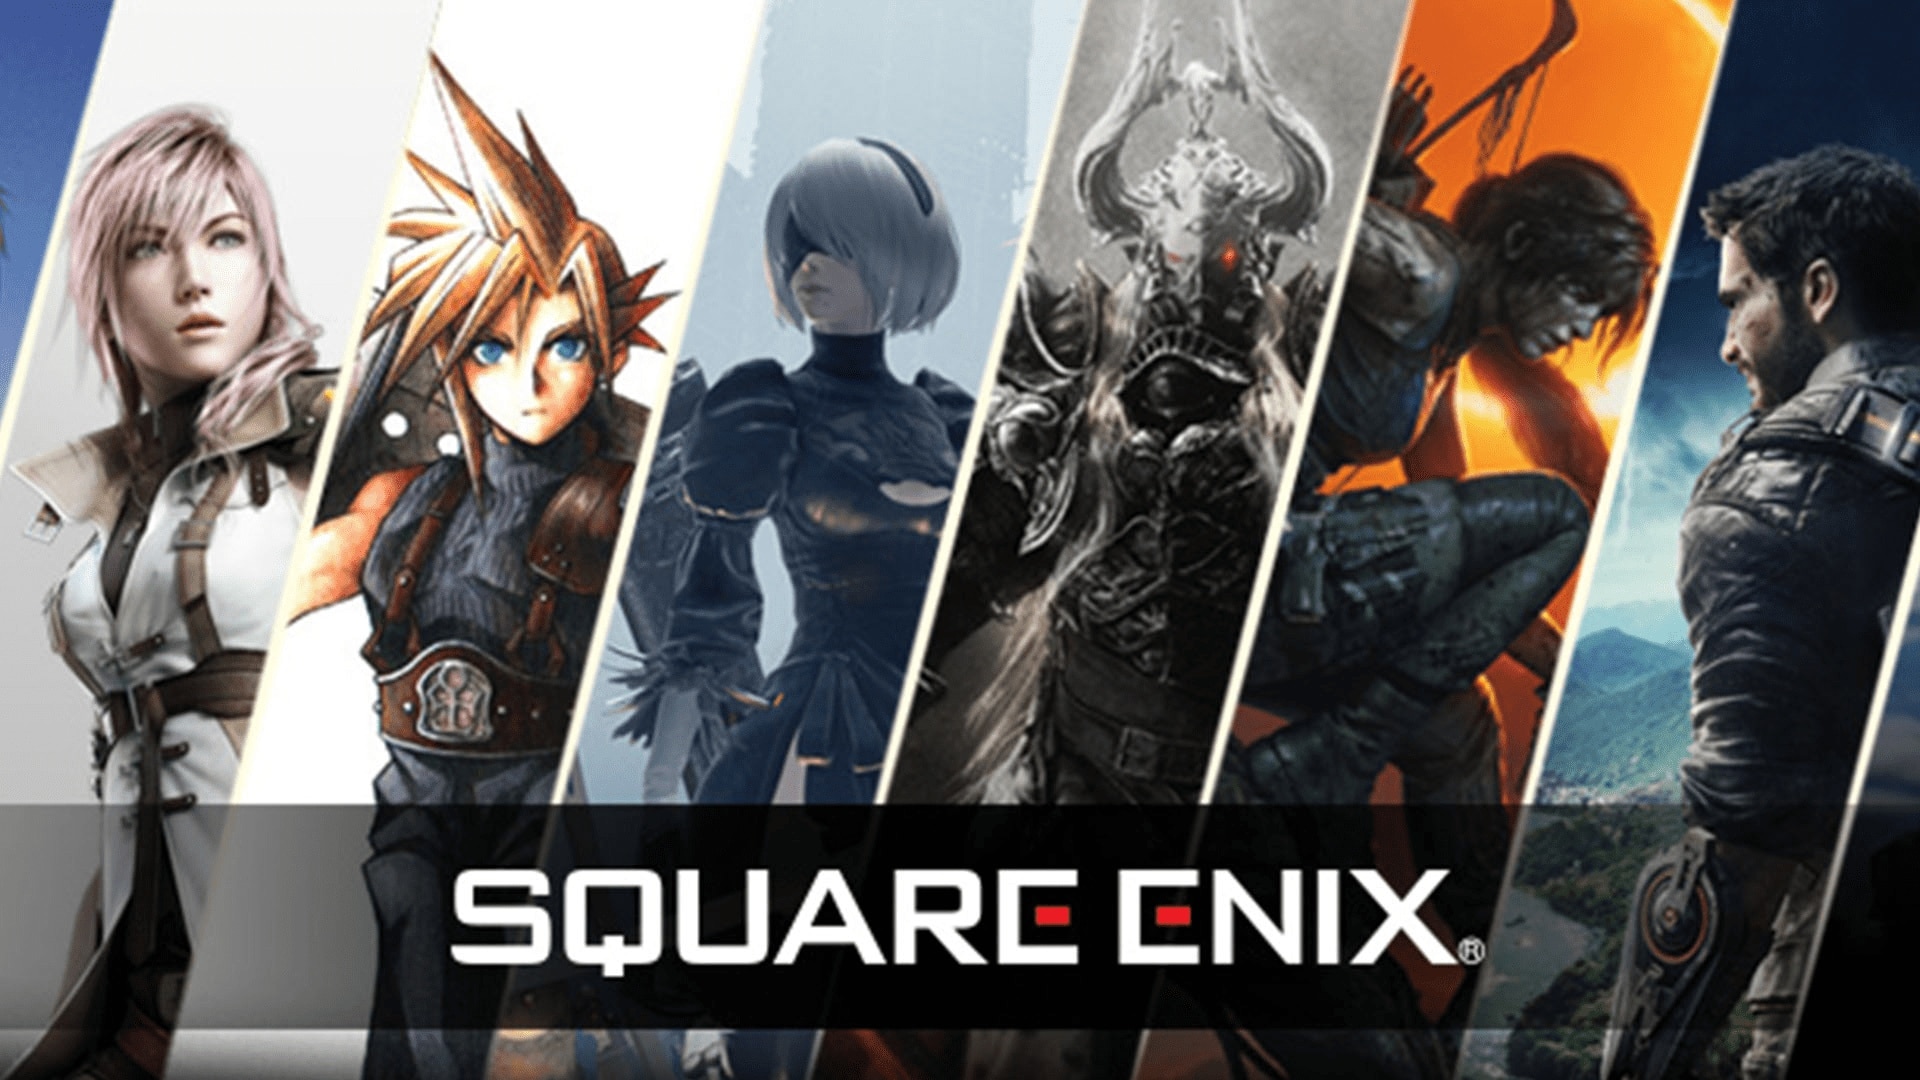 Square Enix is betting big on NFTs to get gamers to do more than just ‘play for fun’